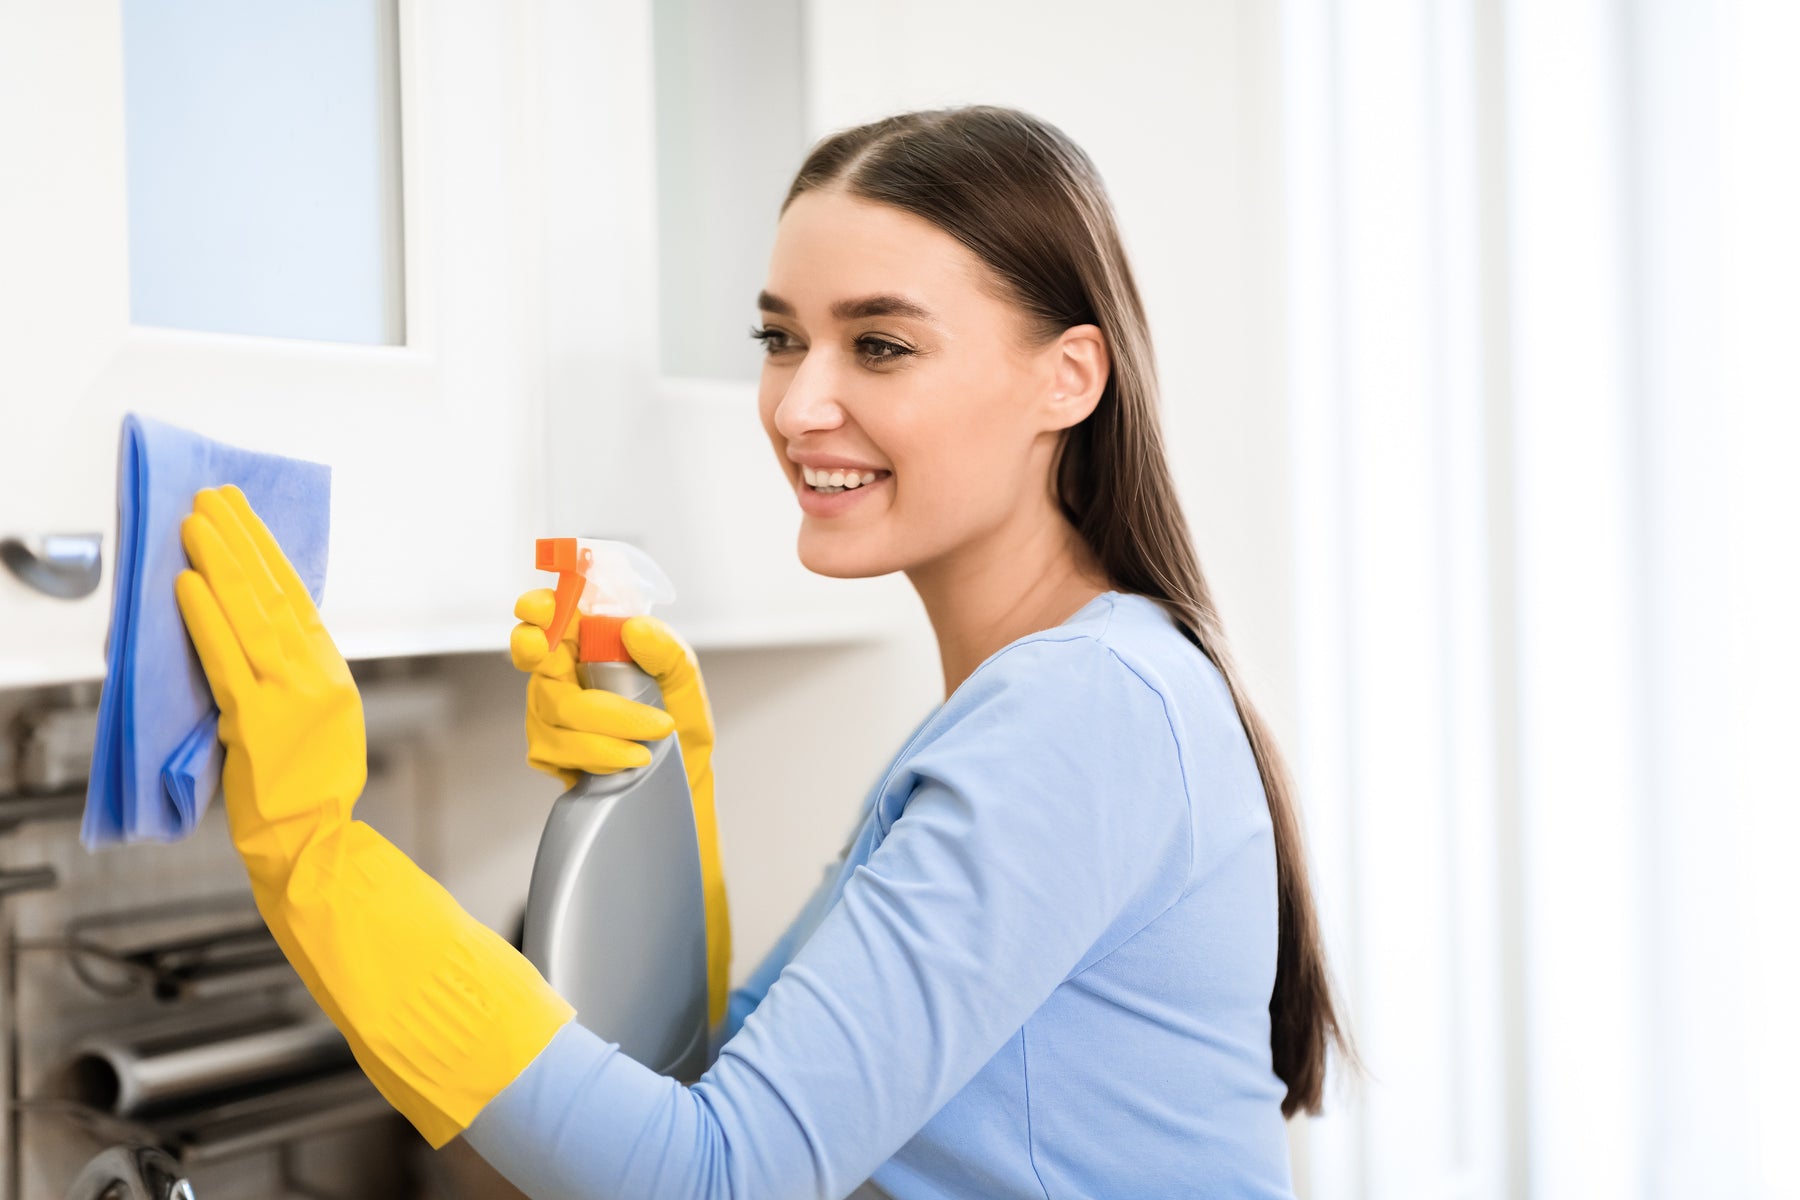 Disinfection Spray vs Wipes - Pros and Cons in Details